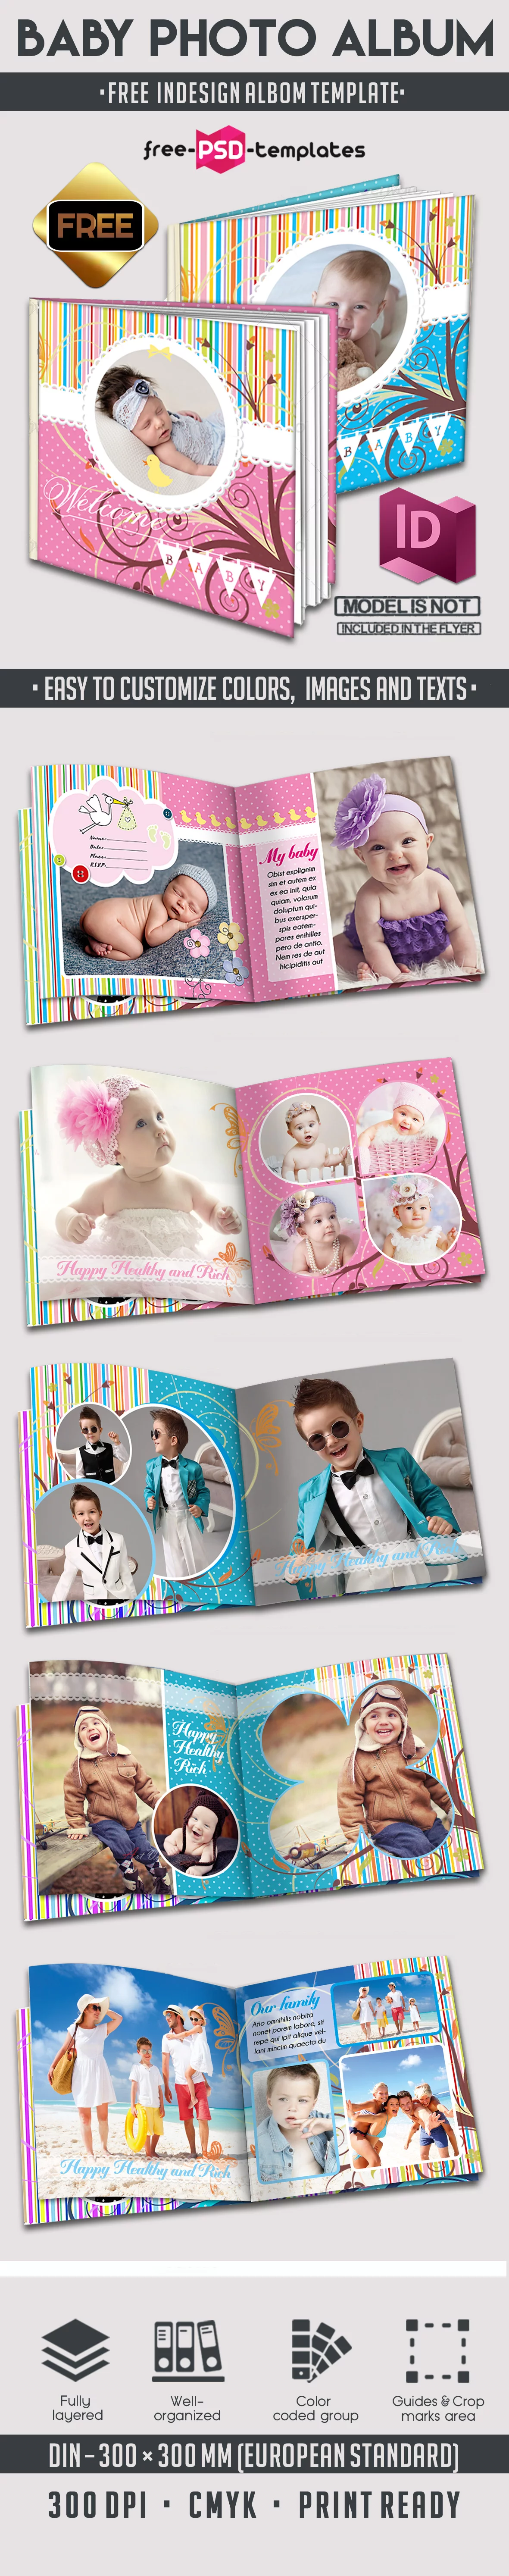 Bigpreview_free-baby-photo-album-12-pages